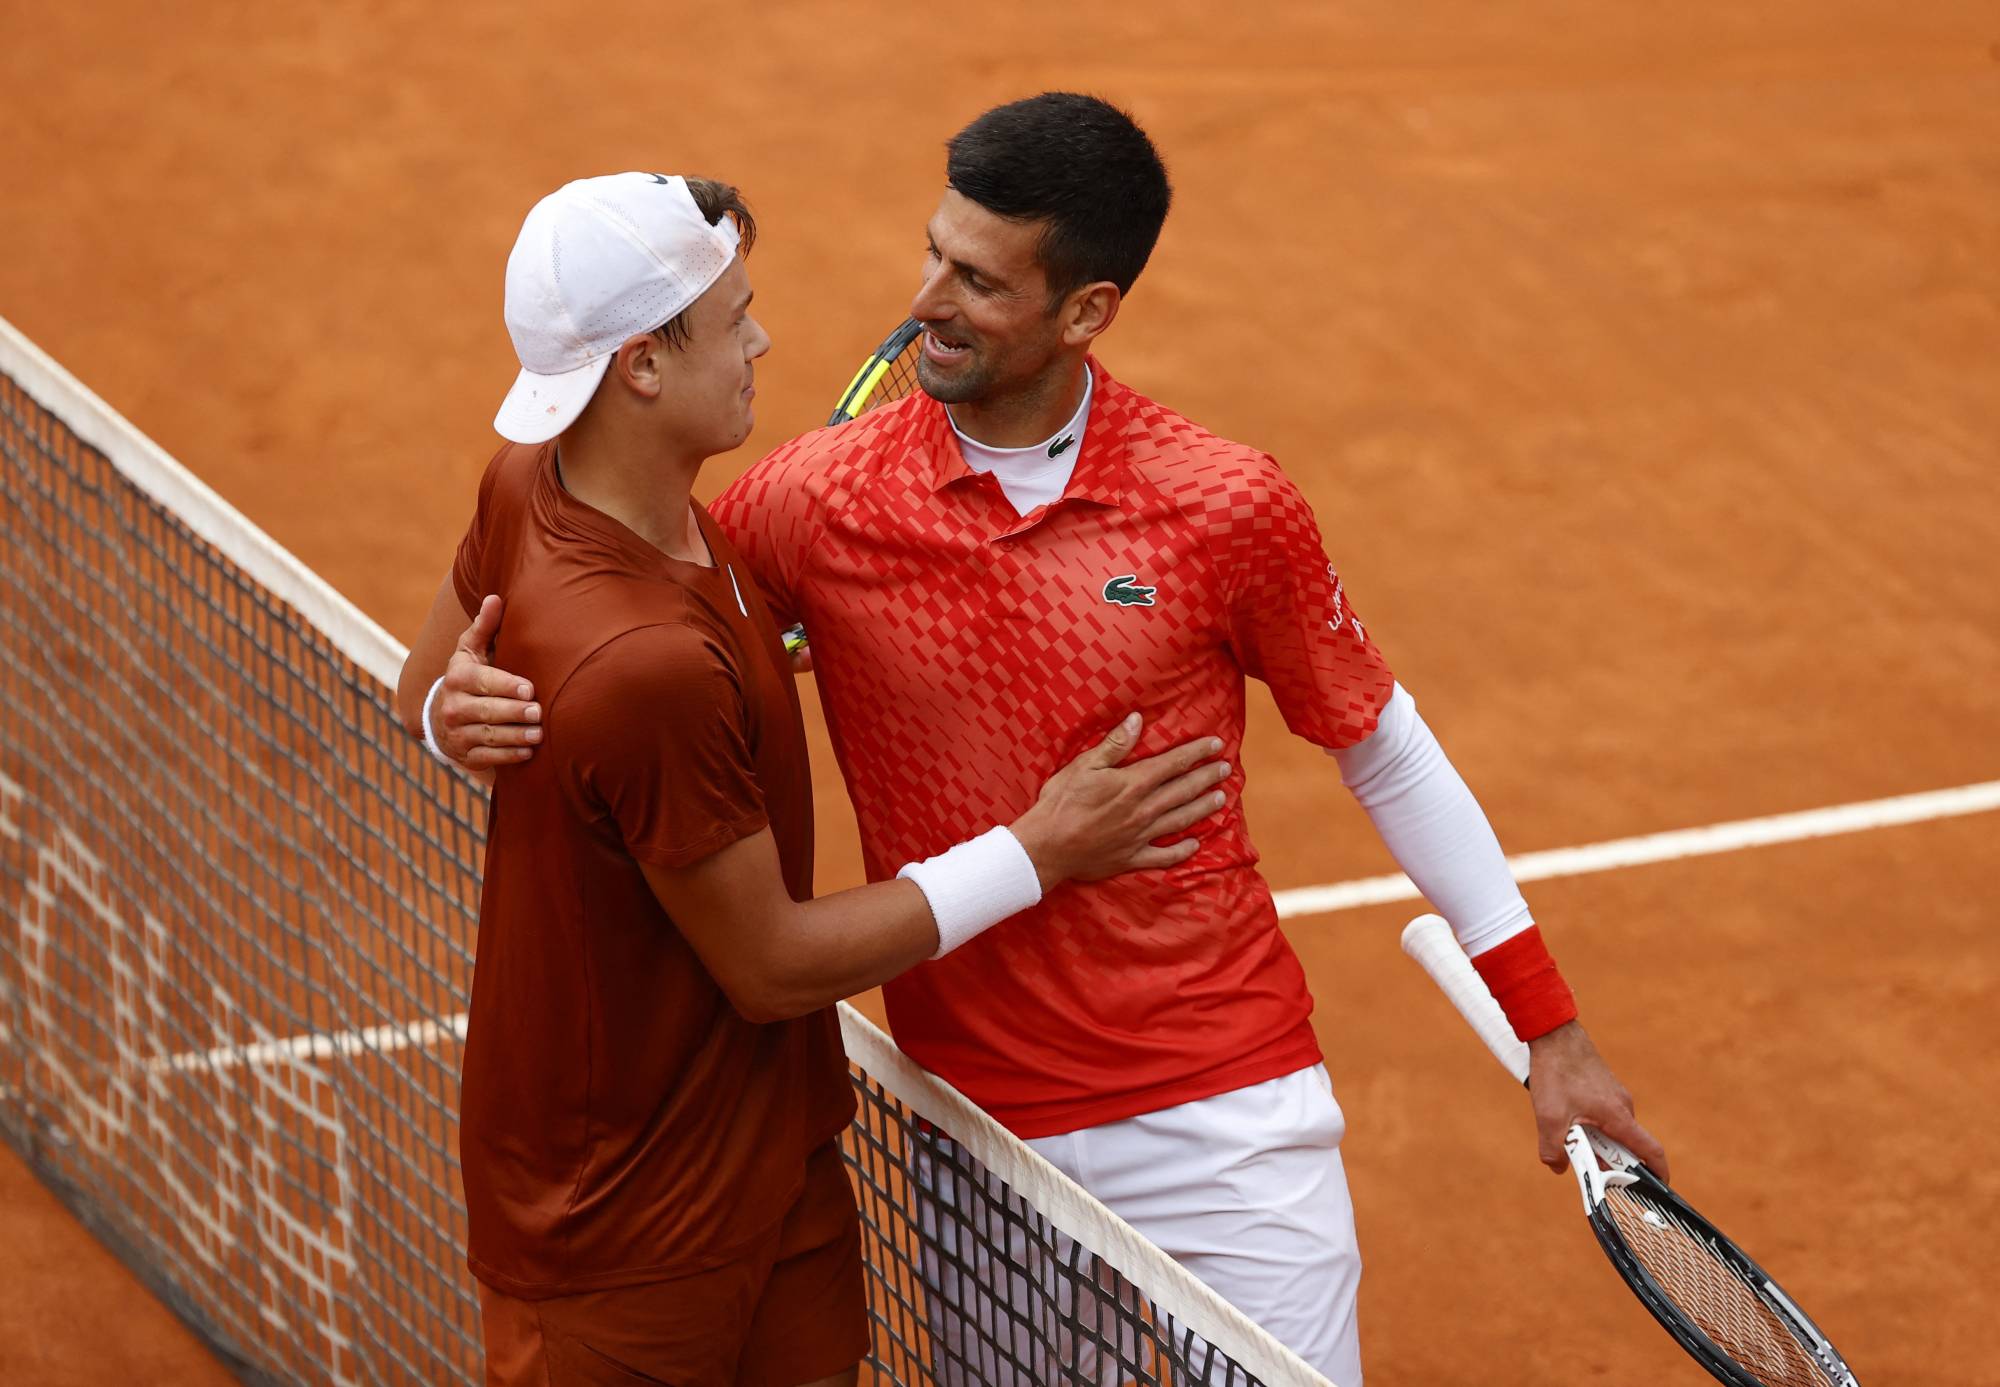 Novak Djokovic hails arrival of new generation after upset loss in Rome